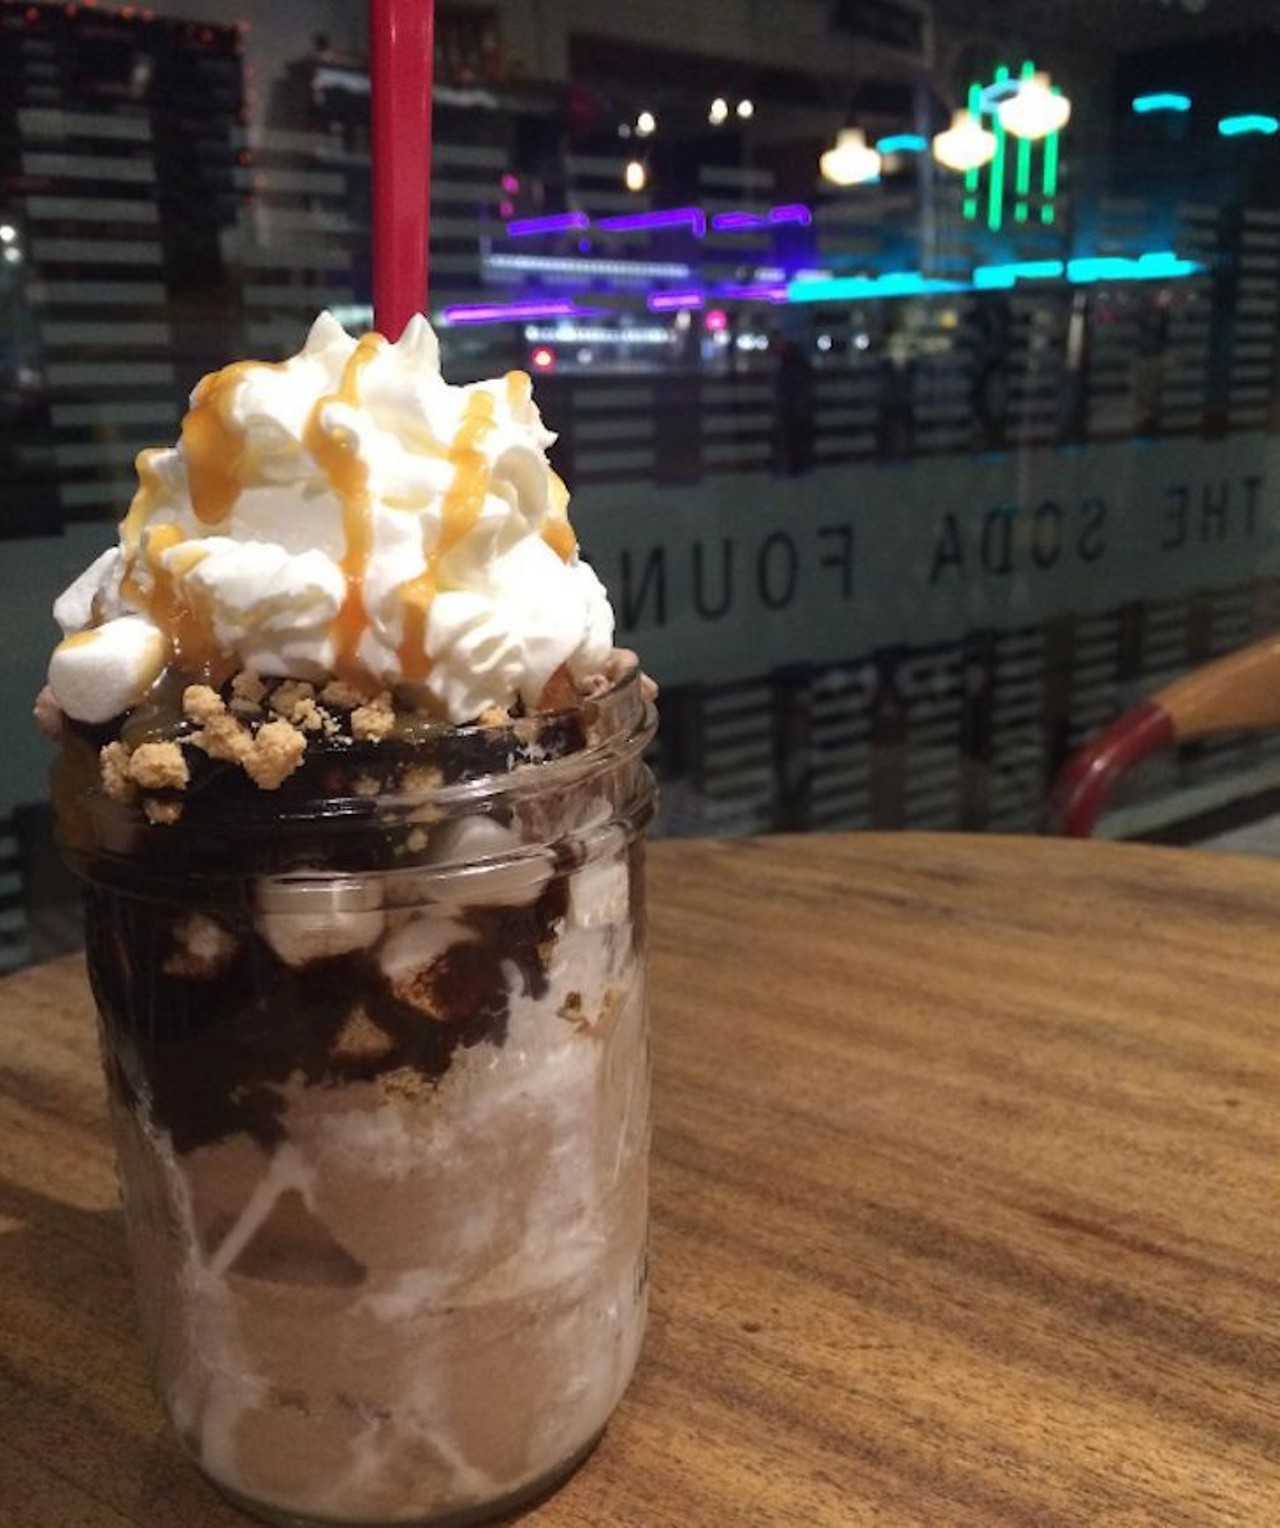  Nutella S'mores Sundae at the Soda Fountain 
2525 Edgewater Drive, 407-540-1006 
The Soda Fountain has all your sundae, milkshake and float needs covered. We recommend the Nutella S&#146;mores Sundae, complete with crushed graham crackers and drizzled with caramel. 
Photo via thesodafountaincp/Instagram